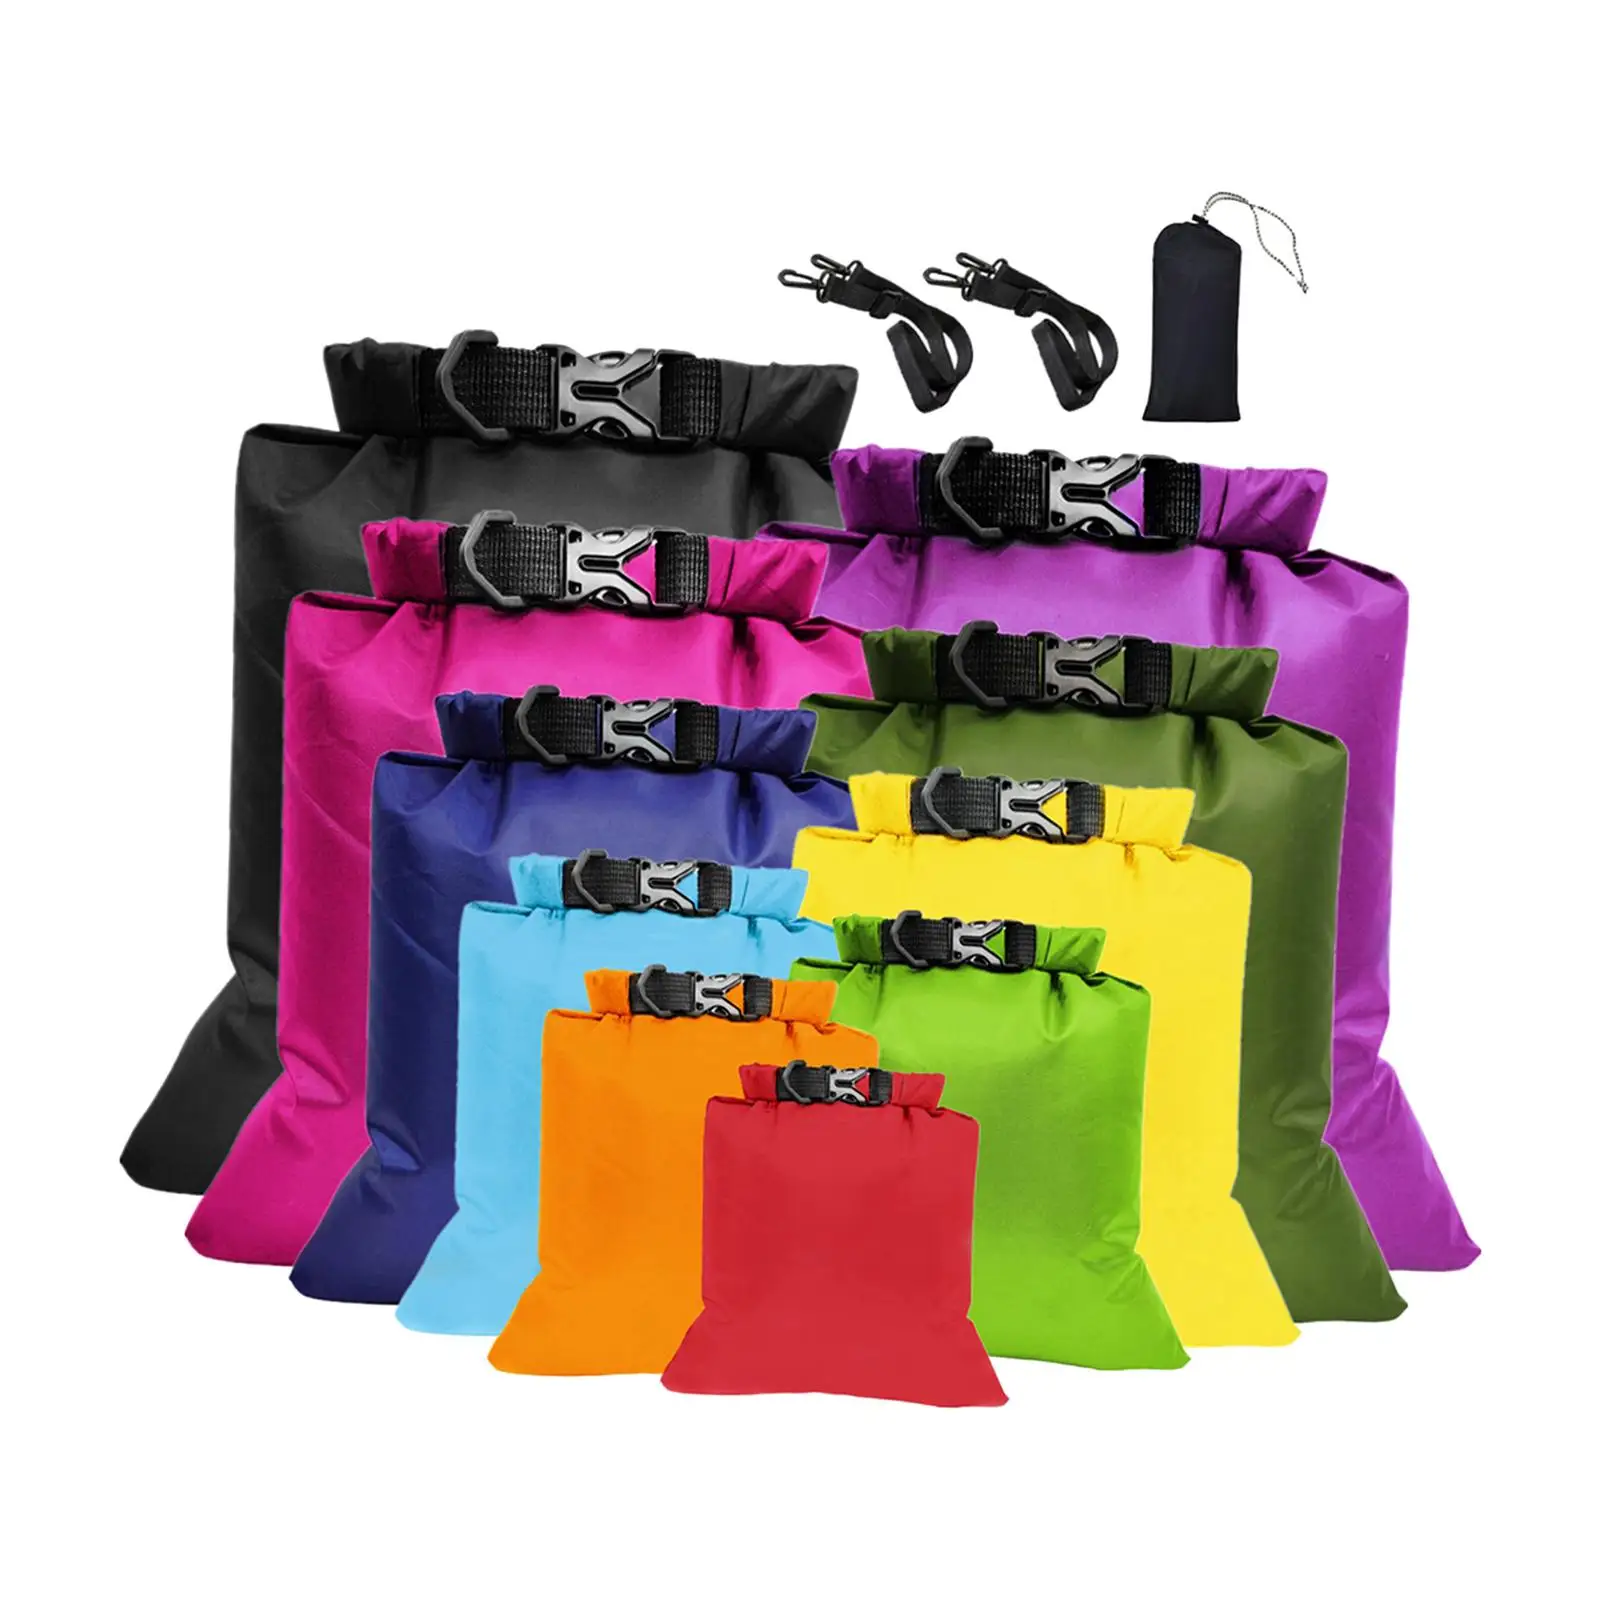 10Pcs Floating Bag for Kayaking Lightweight Heavy Duty Floating Waterproof Bags for Swimming Surfing Backpacking Hiking Kayaking